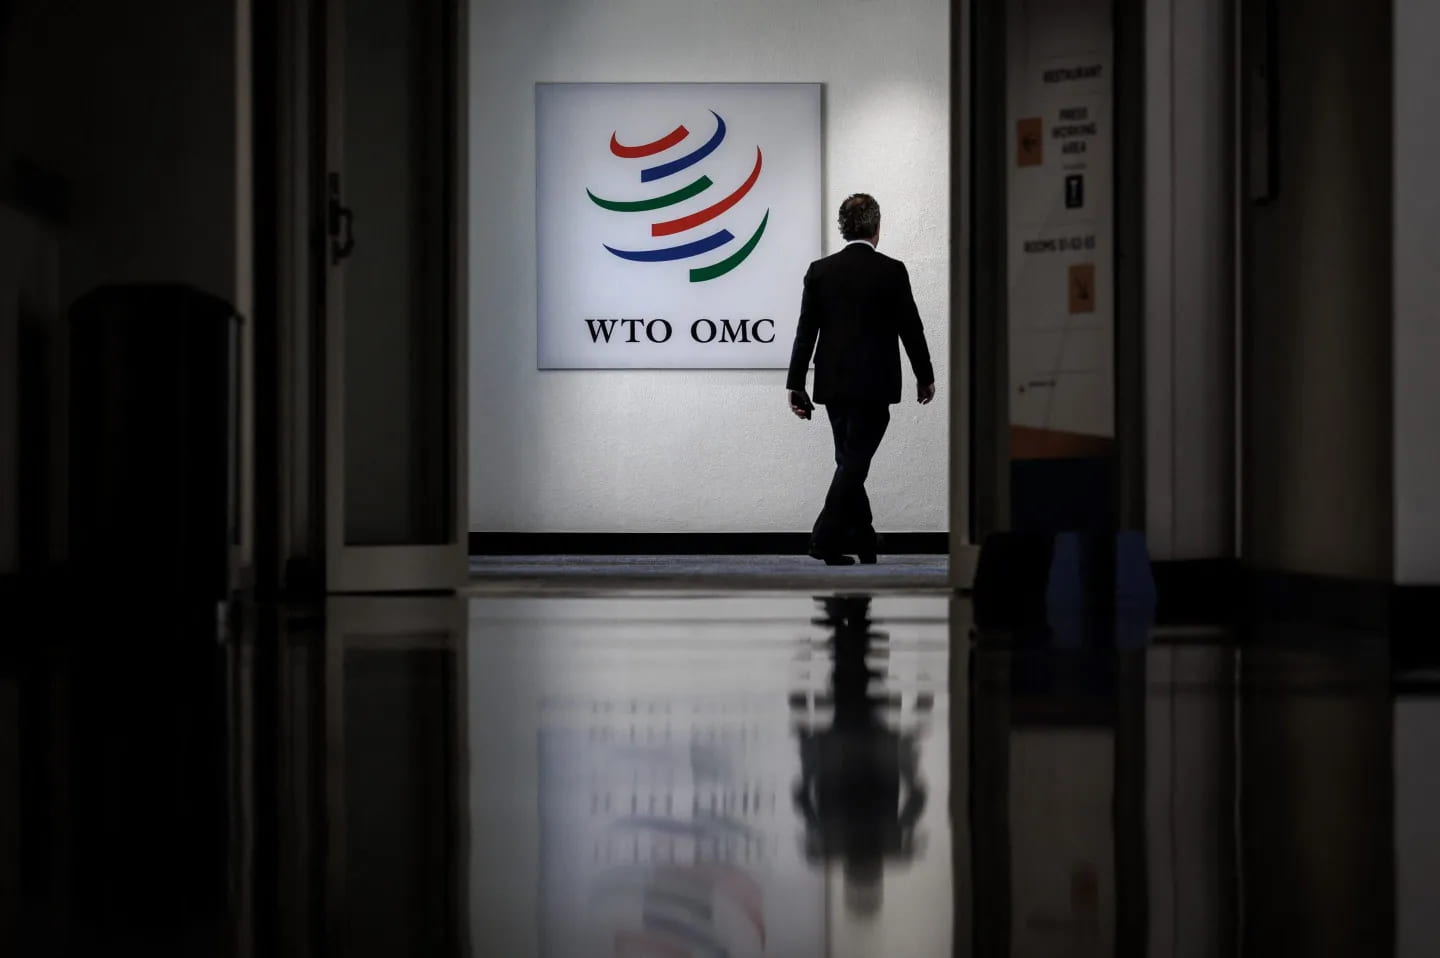 A man walking through the halls of the World Trade Organization. His back is facing the camera and he is walking by a sign that has their logo on the wall.